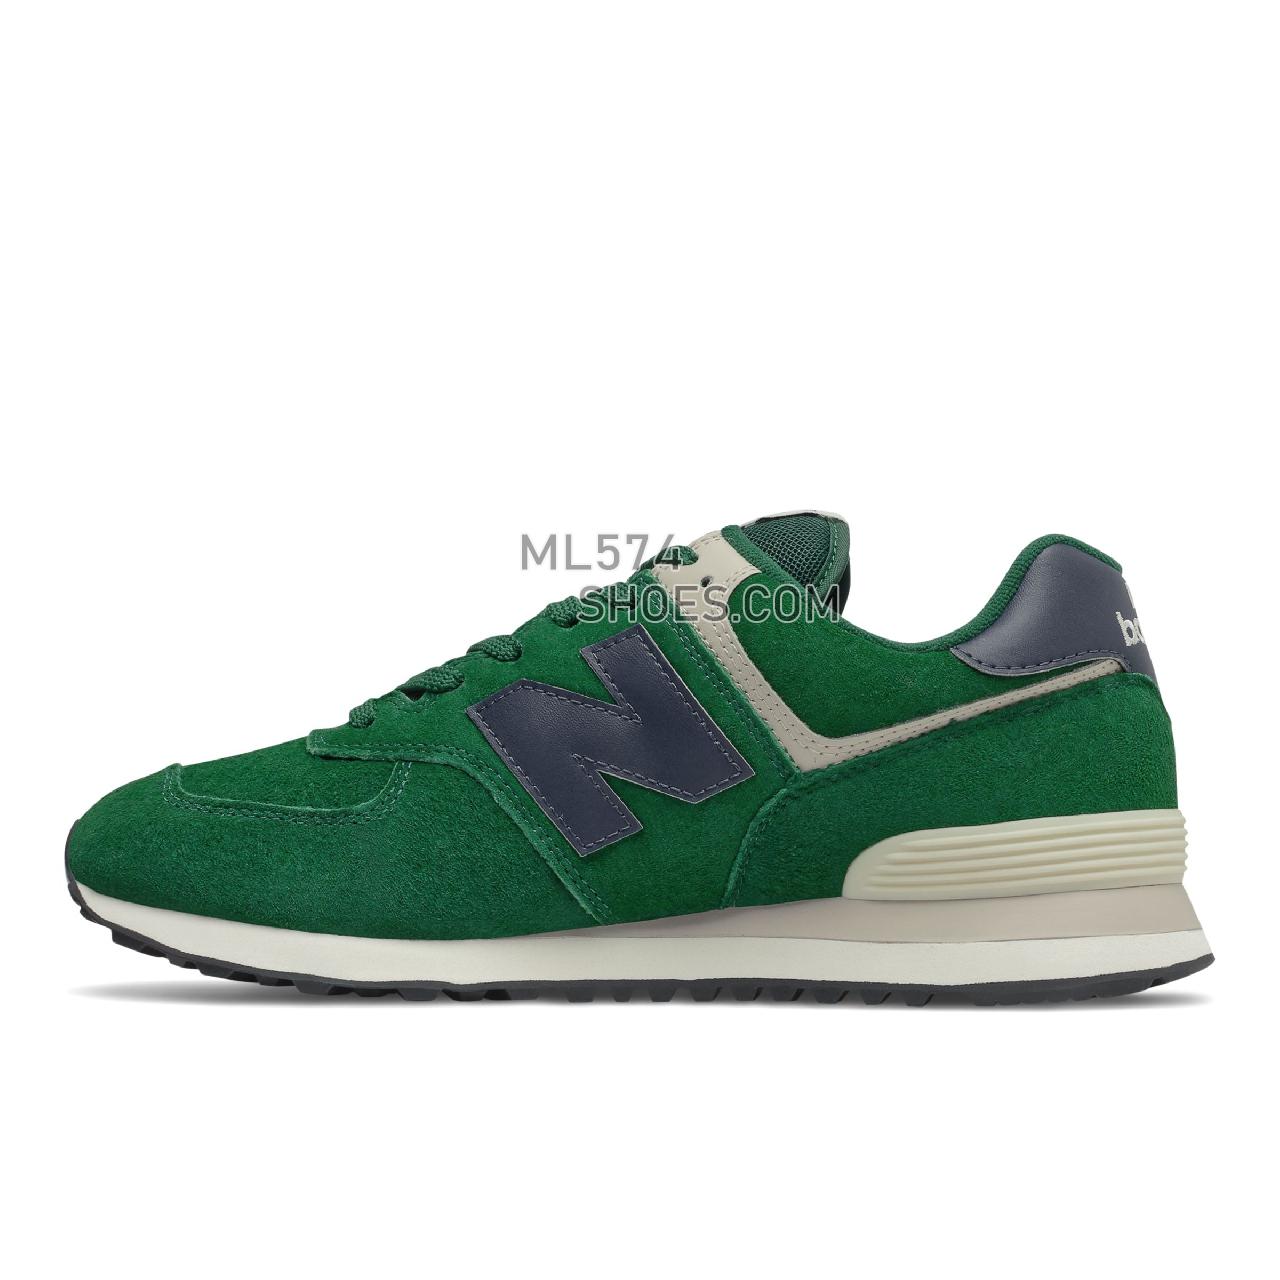 New Balance 574v2 - Men's Sport Style Sneakers - Green with Navy - ML574PQ2